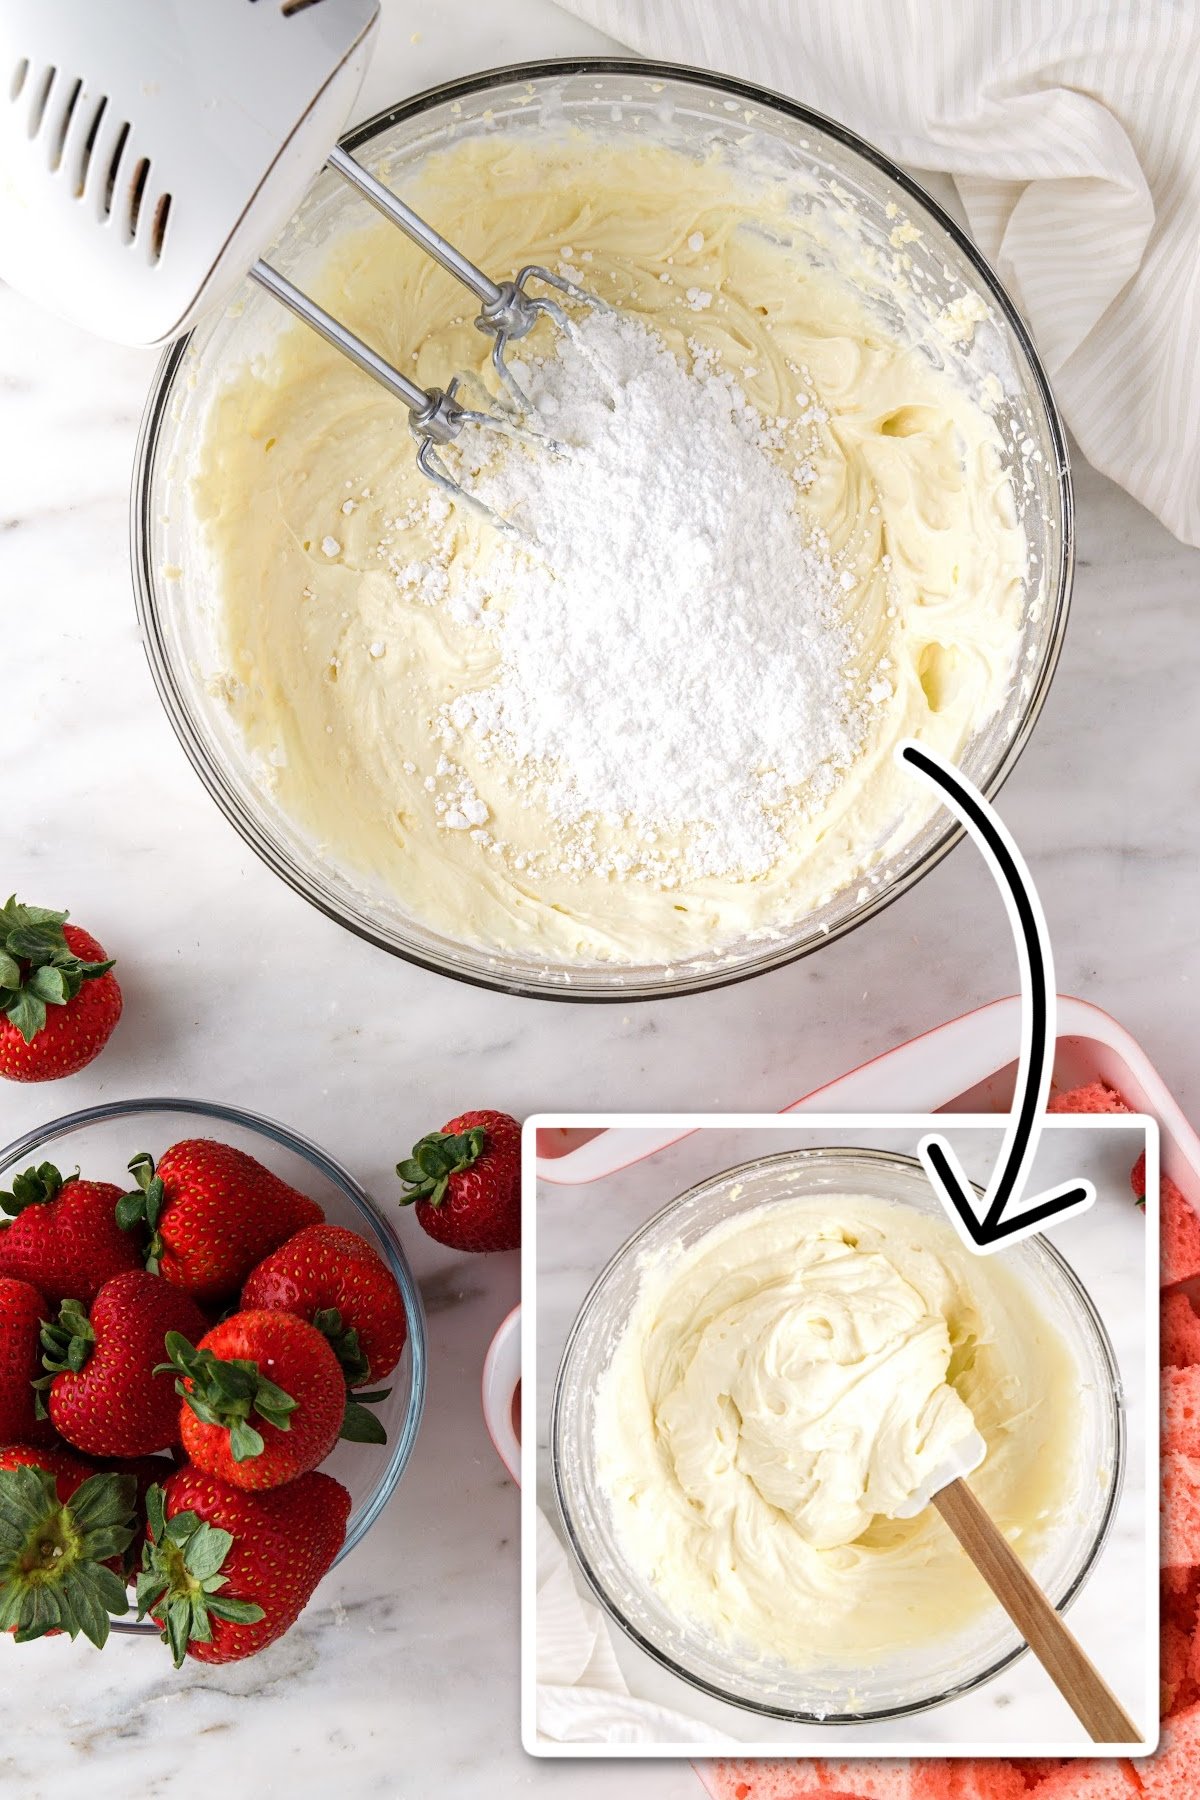 Glass mixing bowl with pudding mixture before and after powdered sugar is mixed in.